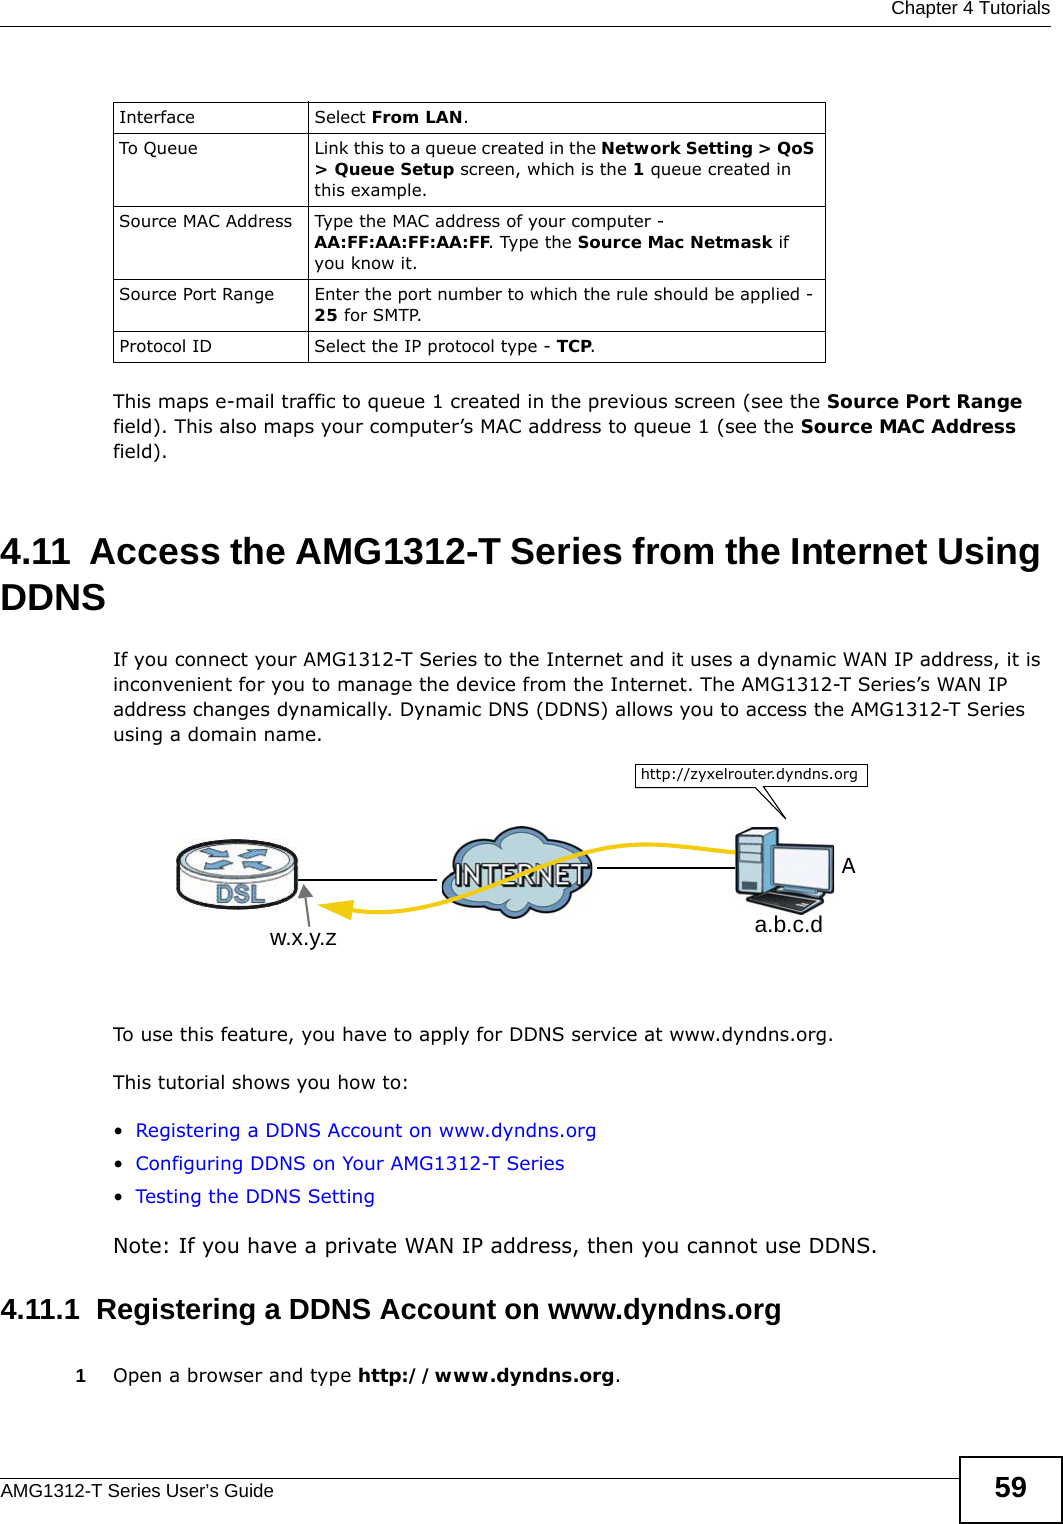  Chapter 4 TutorialsAMG1312-T Series User’s Guide 59This maps e-mail traffic to queue 1 created in the previous screen (see the Source Port Range field). This also maps your computer’s MAC address to queue 1 (see the Source MAC Address field). 4.11  Access the AMG1312-T Series from the Internet Using DDNS If you connect your AMG1312-T Series to the Internet and it uses a dynamic WAN IP address, it is inconvenient for you to manage the device from the Internet. The AMG1312-T Series’s WAN IP address changes dynamically. Dynamic DNS (DDNS) allows you to access the AMG1312-T Series using a domain name. To use this feature, you have to apply for DDNS service at www.dyndns.org.This tutorial shows you how to:•Registering a DDNS Account on www.dyndns.org•Configuring DDNS on Your AMG1312-T Series•Testing the DDNS SettingNote: If you have a private WAN IP address, then you cannot use DDNS.4.11.1  Registering a DDNS Account on www.dyndns.org1Open a browser and type http://www.dyndns.org.Interface Select From LAN.To Queue Link this to a queue created in the Network Setting &gt; QoS &gt; Queue Setup screen, which is the 1 queue created in this example.Source MAC Address Type the MAC address of your computer - AA:FF:AA:FF:AA:FF. Type the Source Mac Netmask if you know it.Source Port Range Enter the port number to which the rule should be applied - 25 for SMTP.Protocol ID Select the IP protocol type - TCP.w.x.y.z a.b.c.dhttp://zyxelrouter.dyndns.orgA